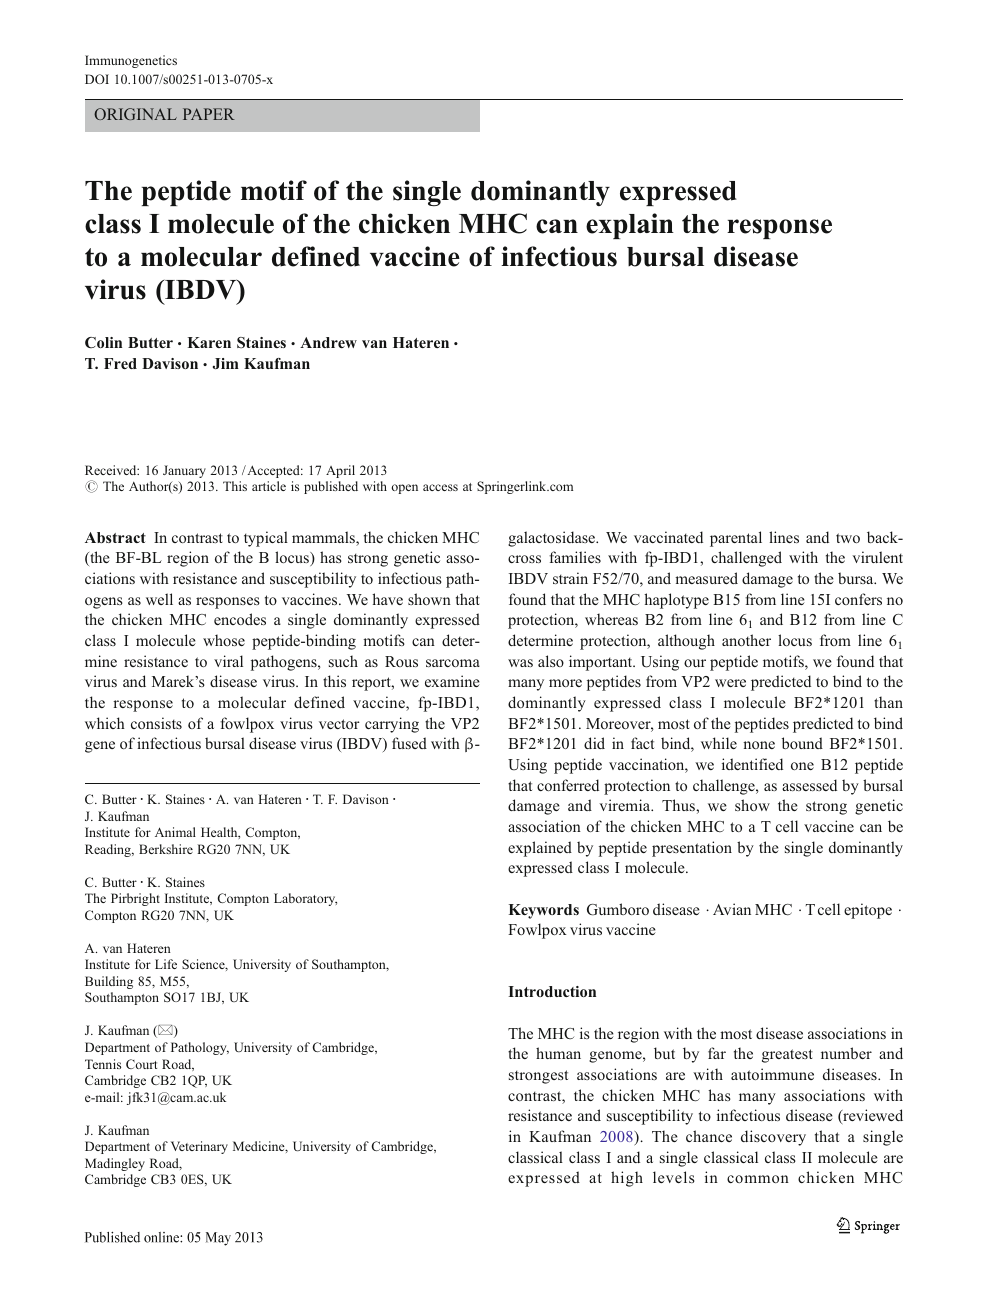 Derved silke Mand The peptide motif of the single dominantly expressed class I molecule of  the chicken MHC can explain the response to a molecular defined vaccine of  infectious bursal disease virus (IBDV) – topic